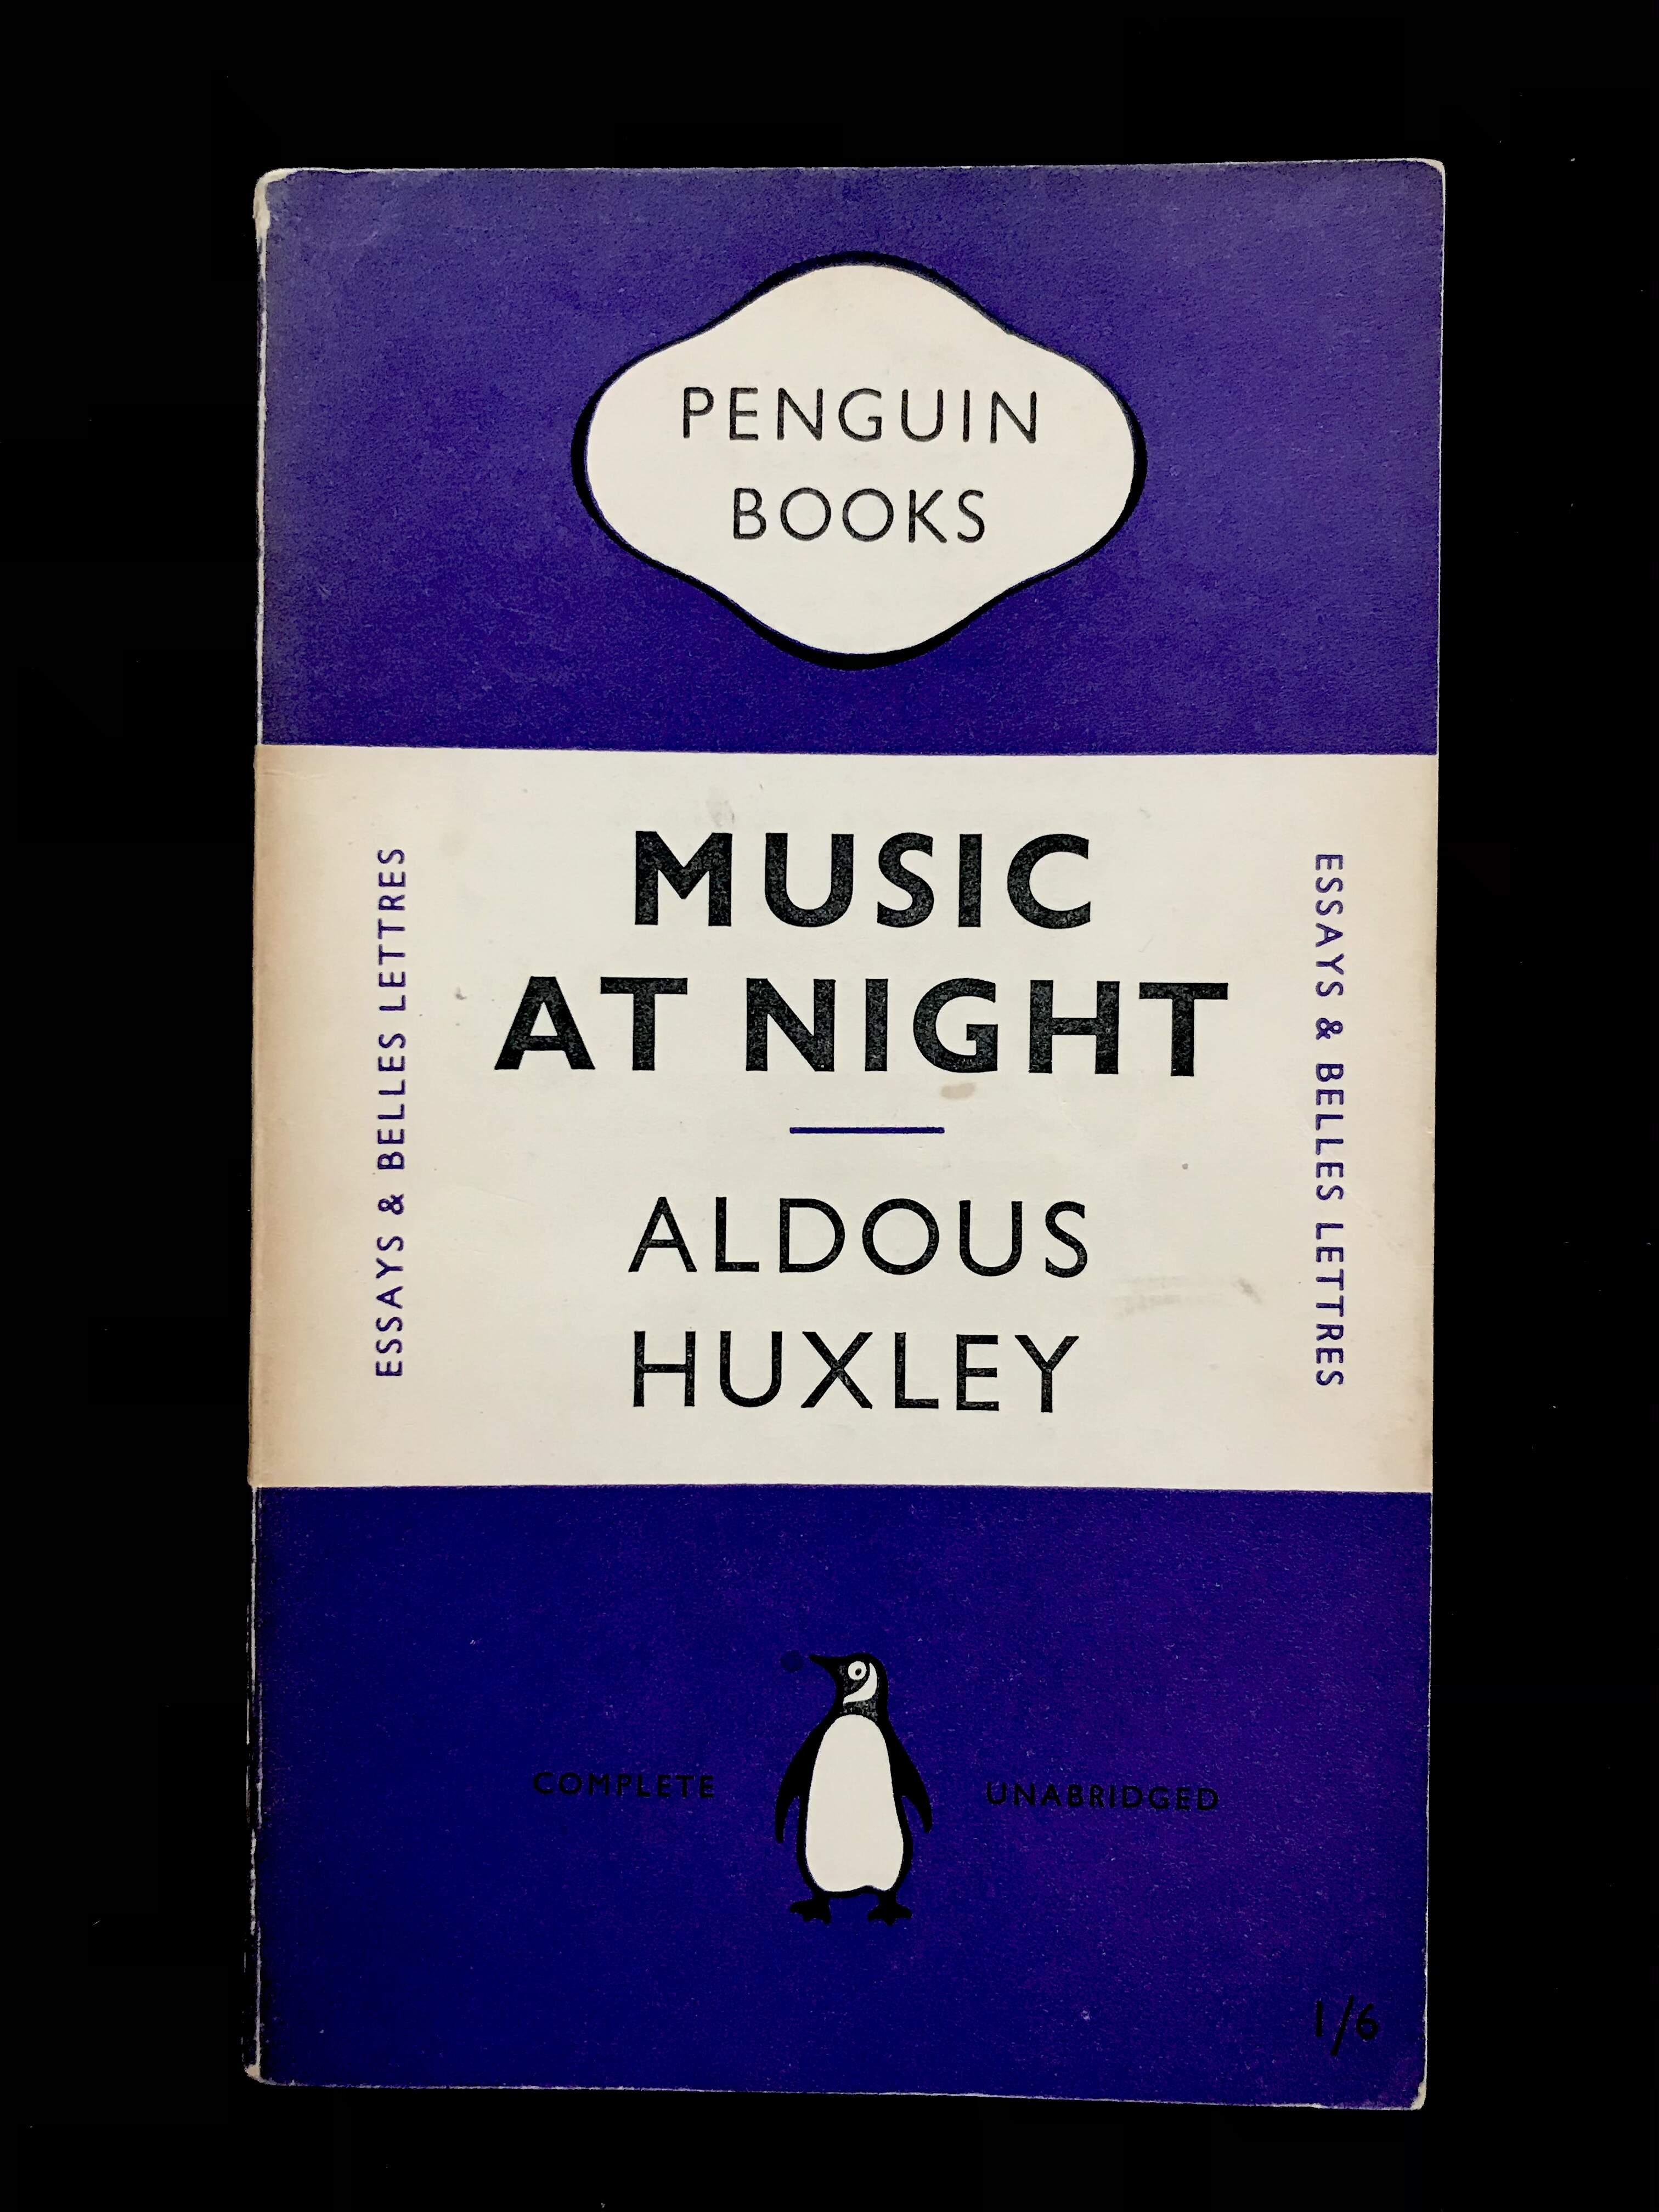 Music At Night by Aldous Huxley